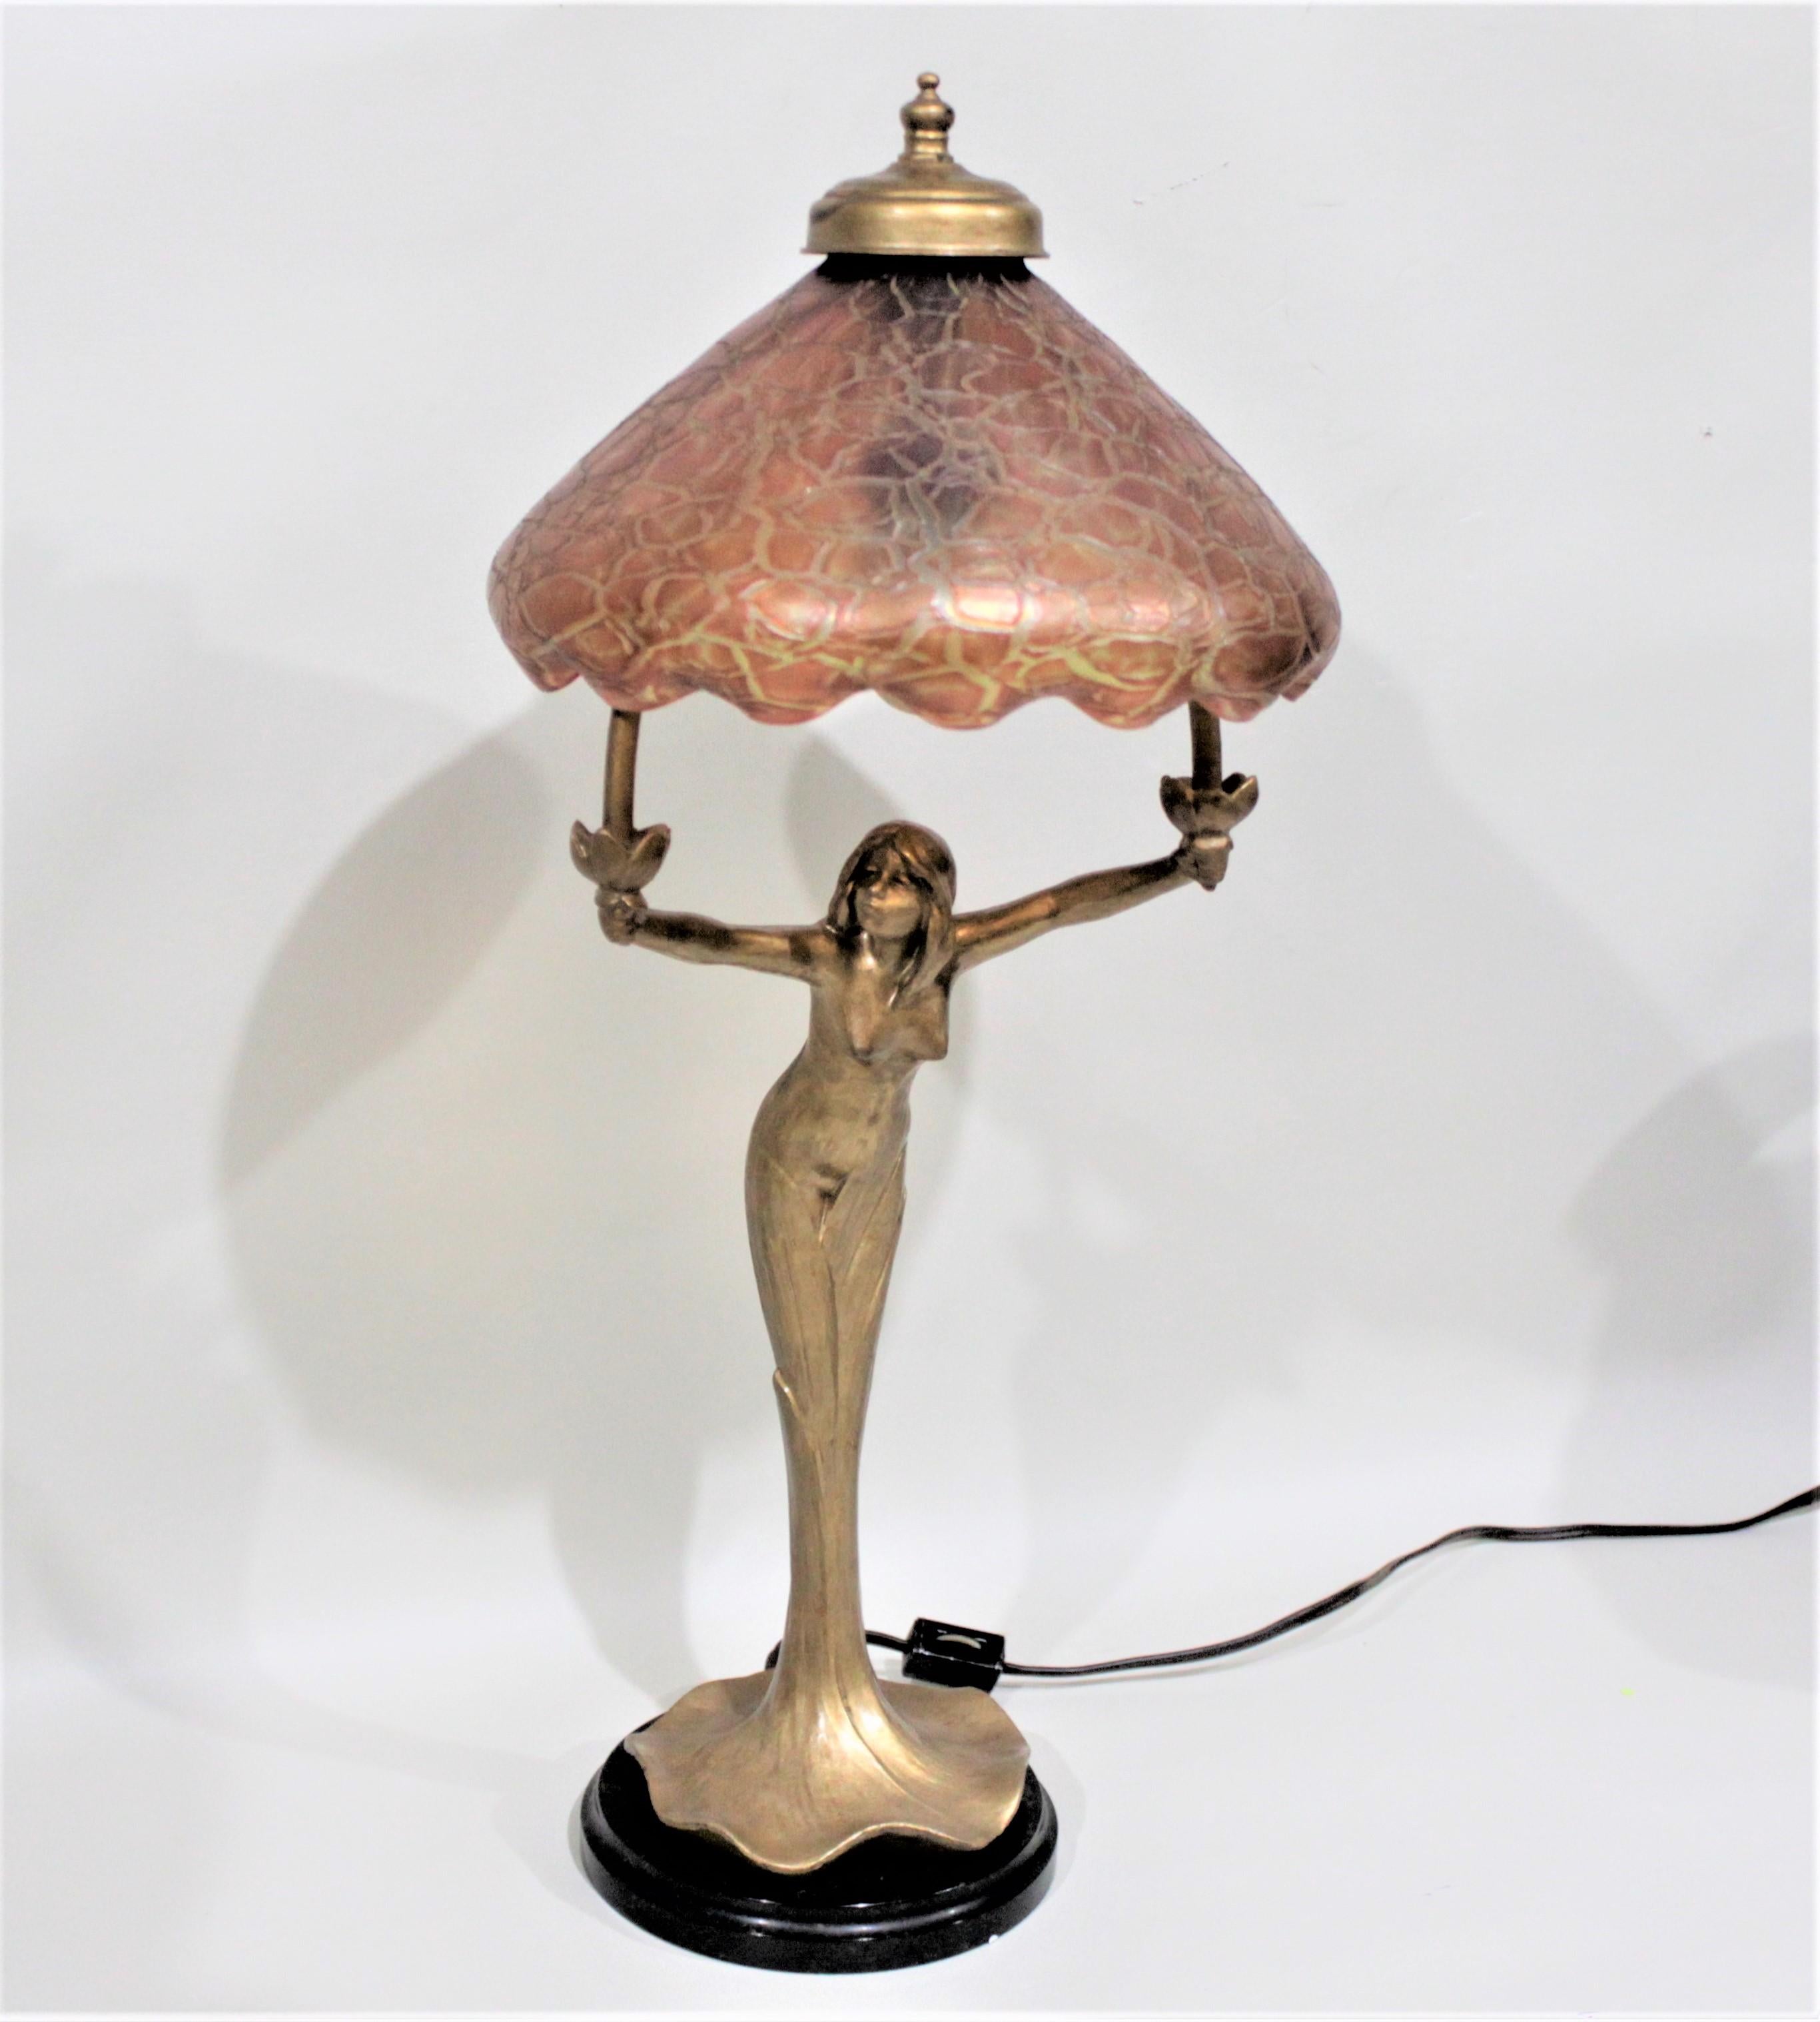 This table lamp is completely unmarked but is presumed to have been made in Europe in approximately 1910 in the Art Nouveau period and style. The figural base of the lamp is a young woman wearing a flowing gown standing with outstretched arms that